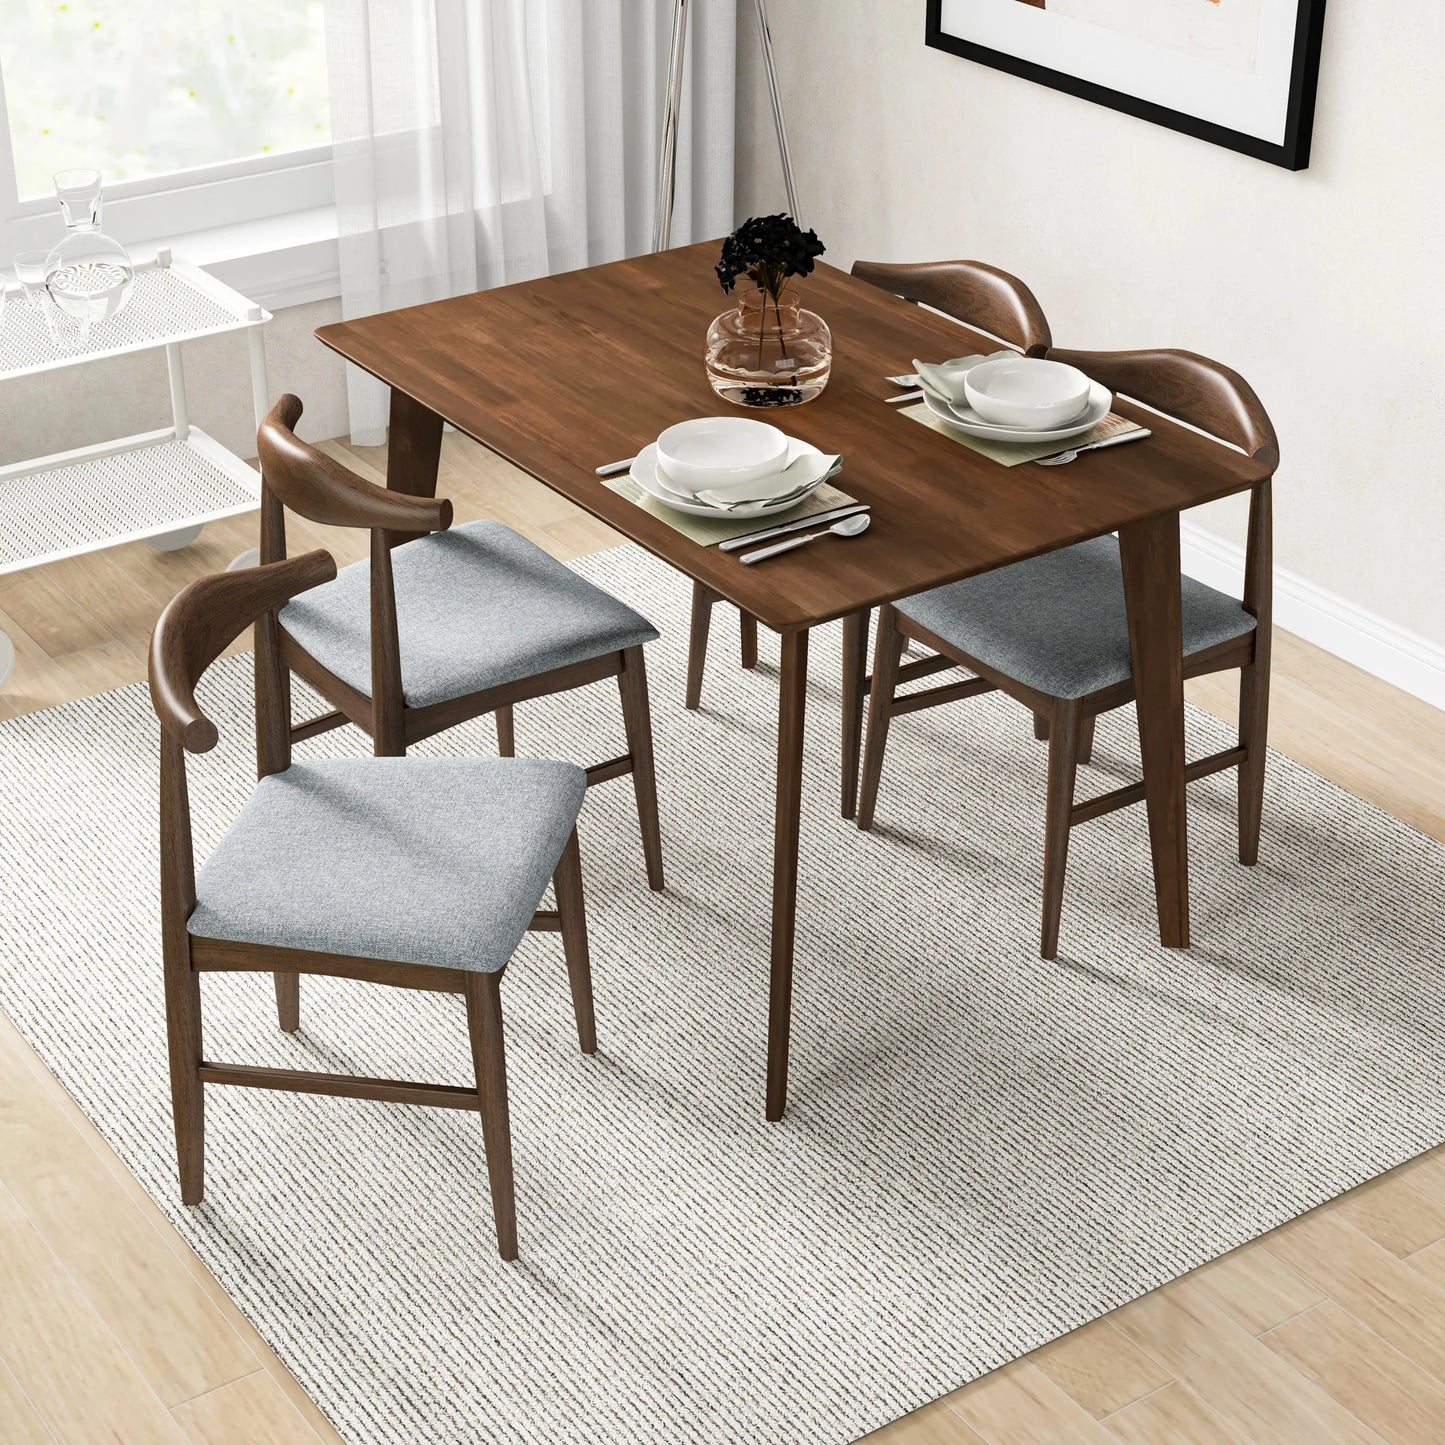 Dining Set, Abbott Small Table (Walnut) with 4 Winston Gray Fabric Chairs